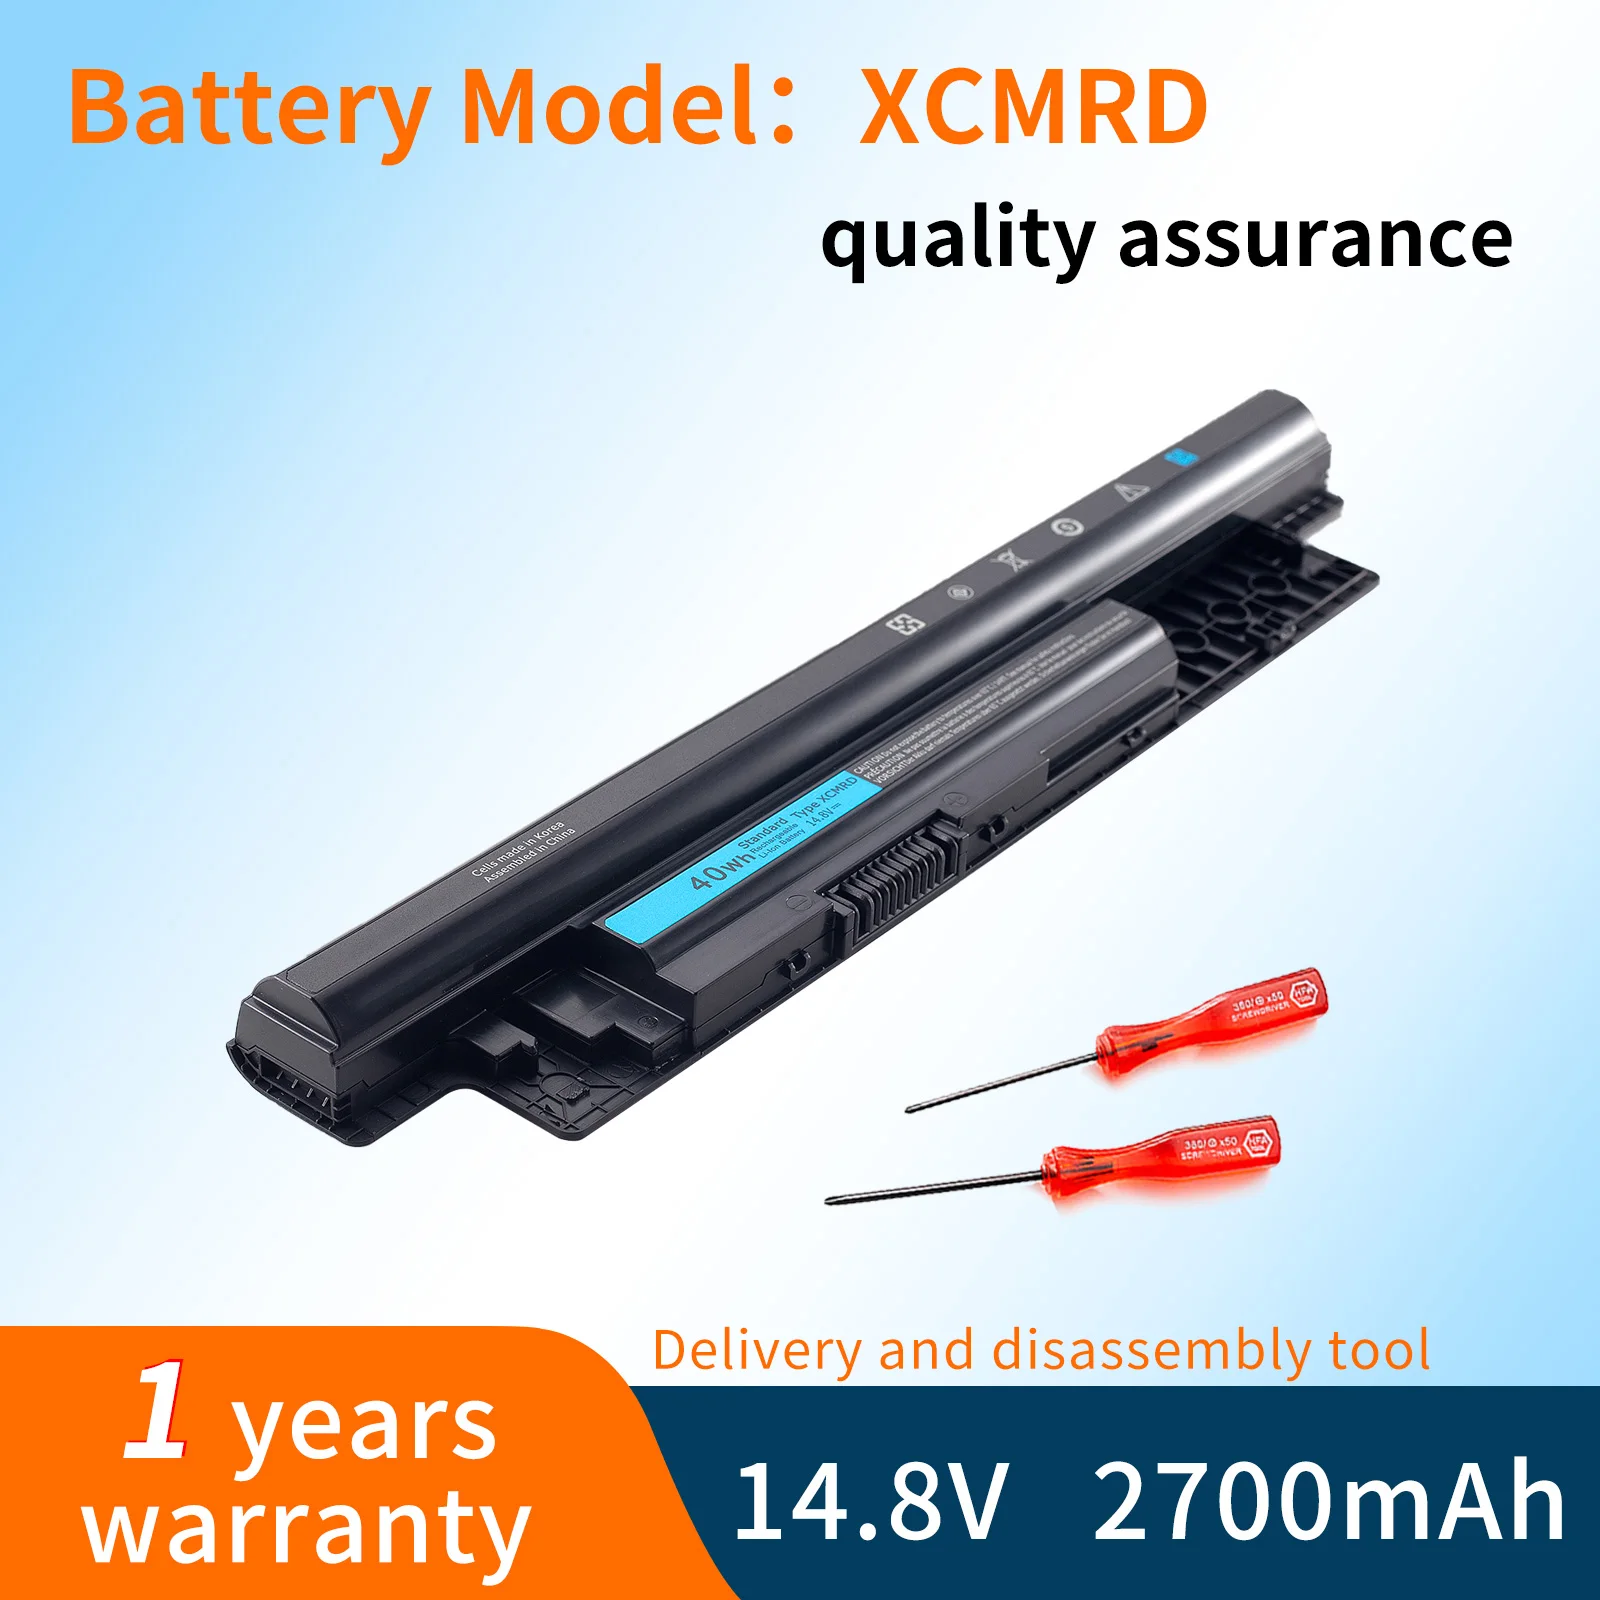 

BVBH XCMRD 65WH MR90Y Laptop Battery for Dell Inspiron 3421 3437 3442 3443 3521 3721 3737 5421 5437 5537 3537 5521 5721 5737